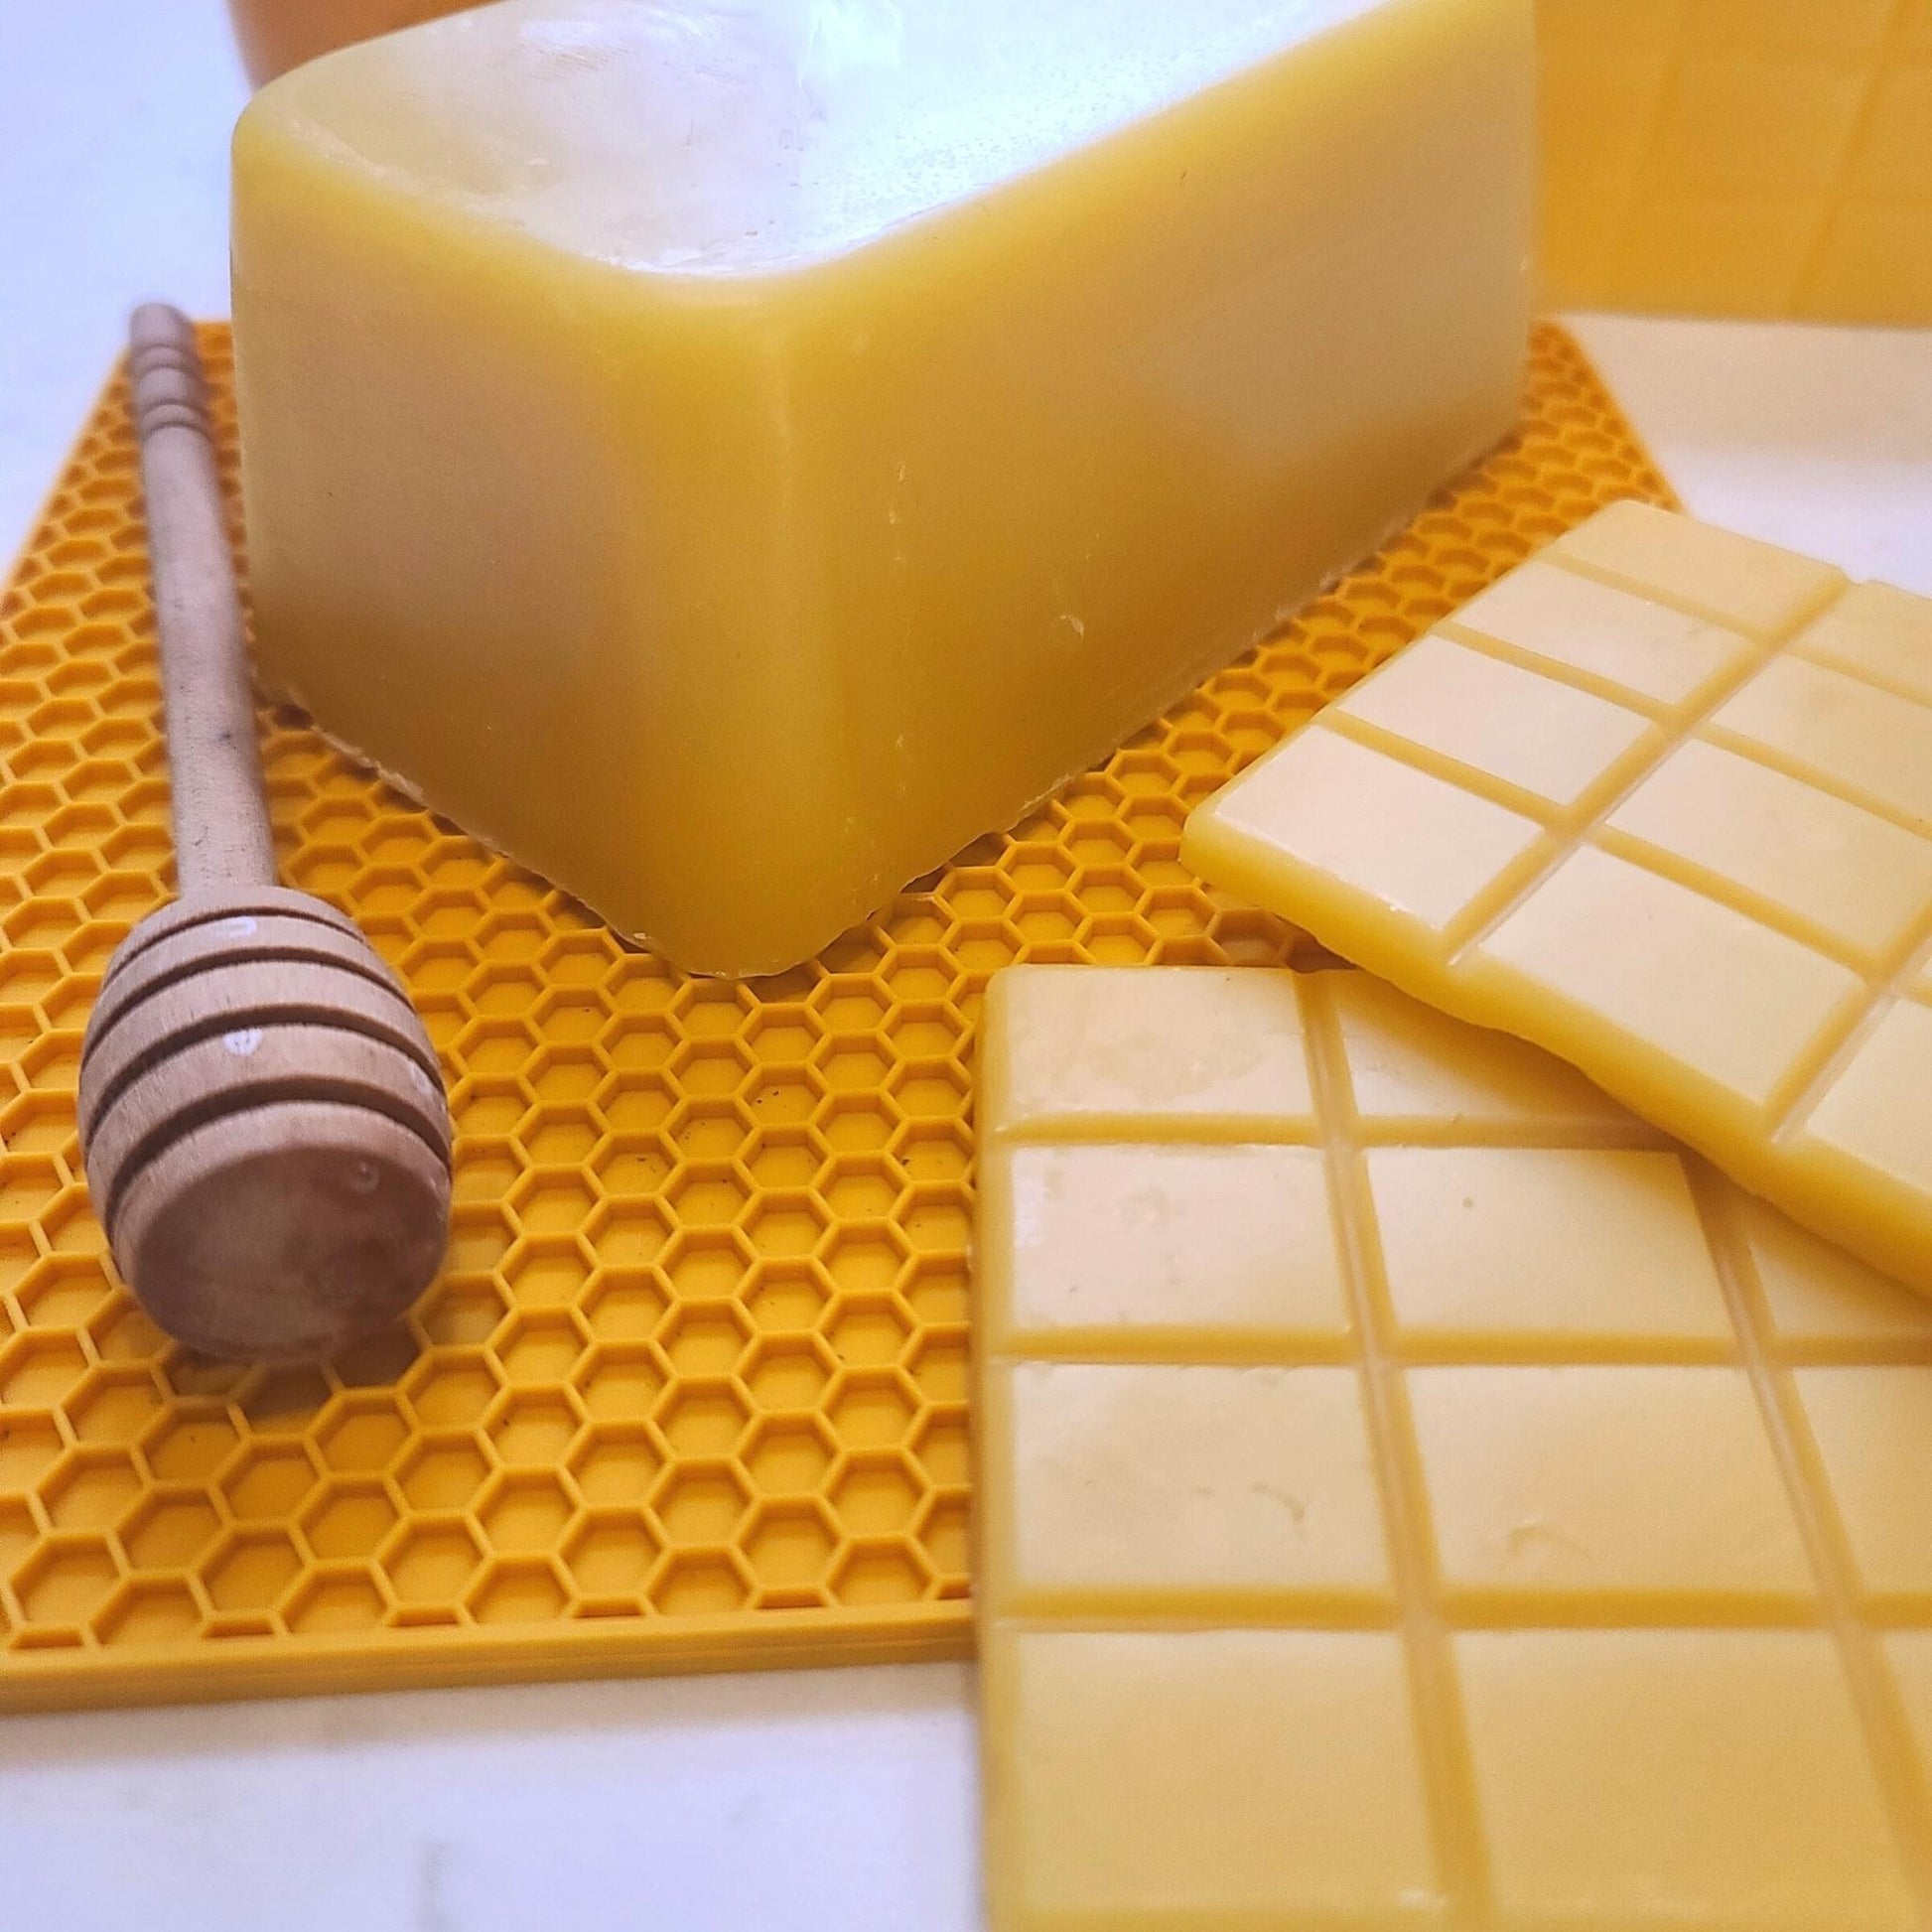 Beeswax Bulk - from Ontario Bees - sold by weight